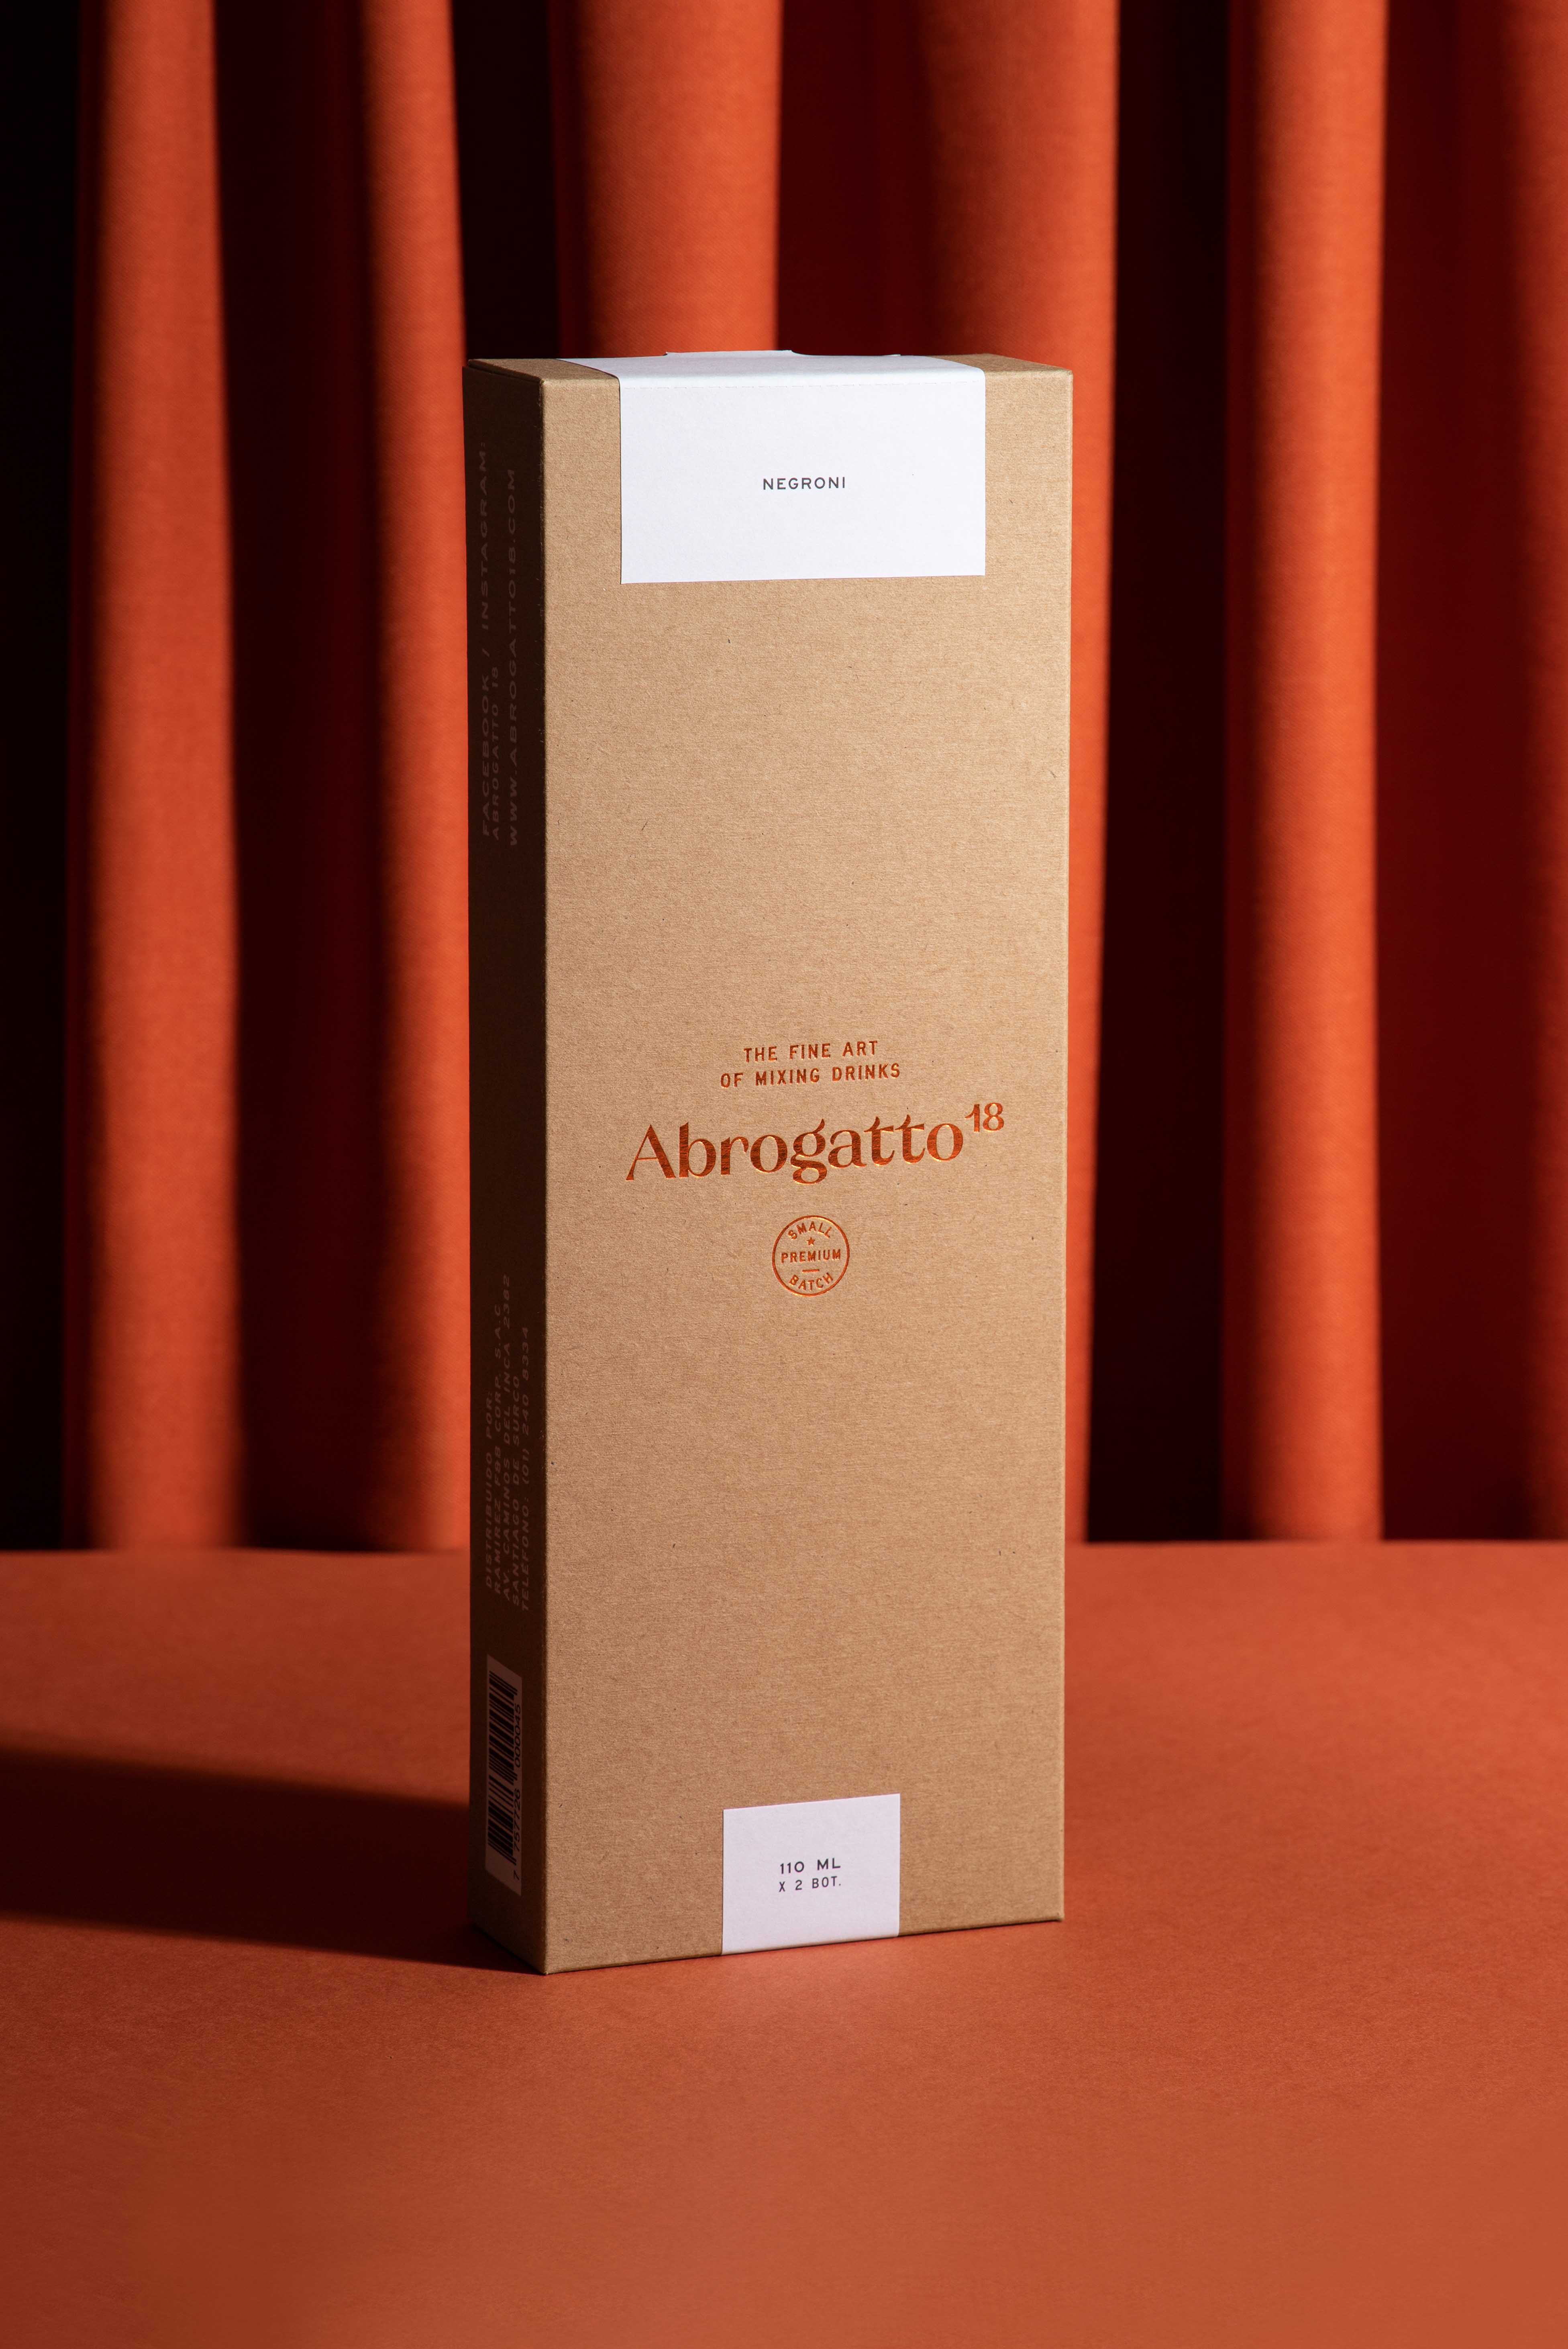 Secondary and Distribution Packaging for Abrogatto 18